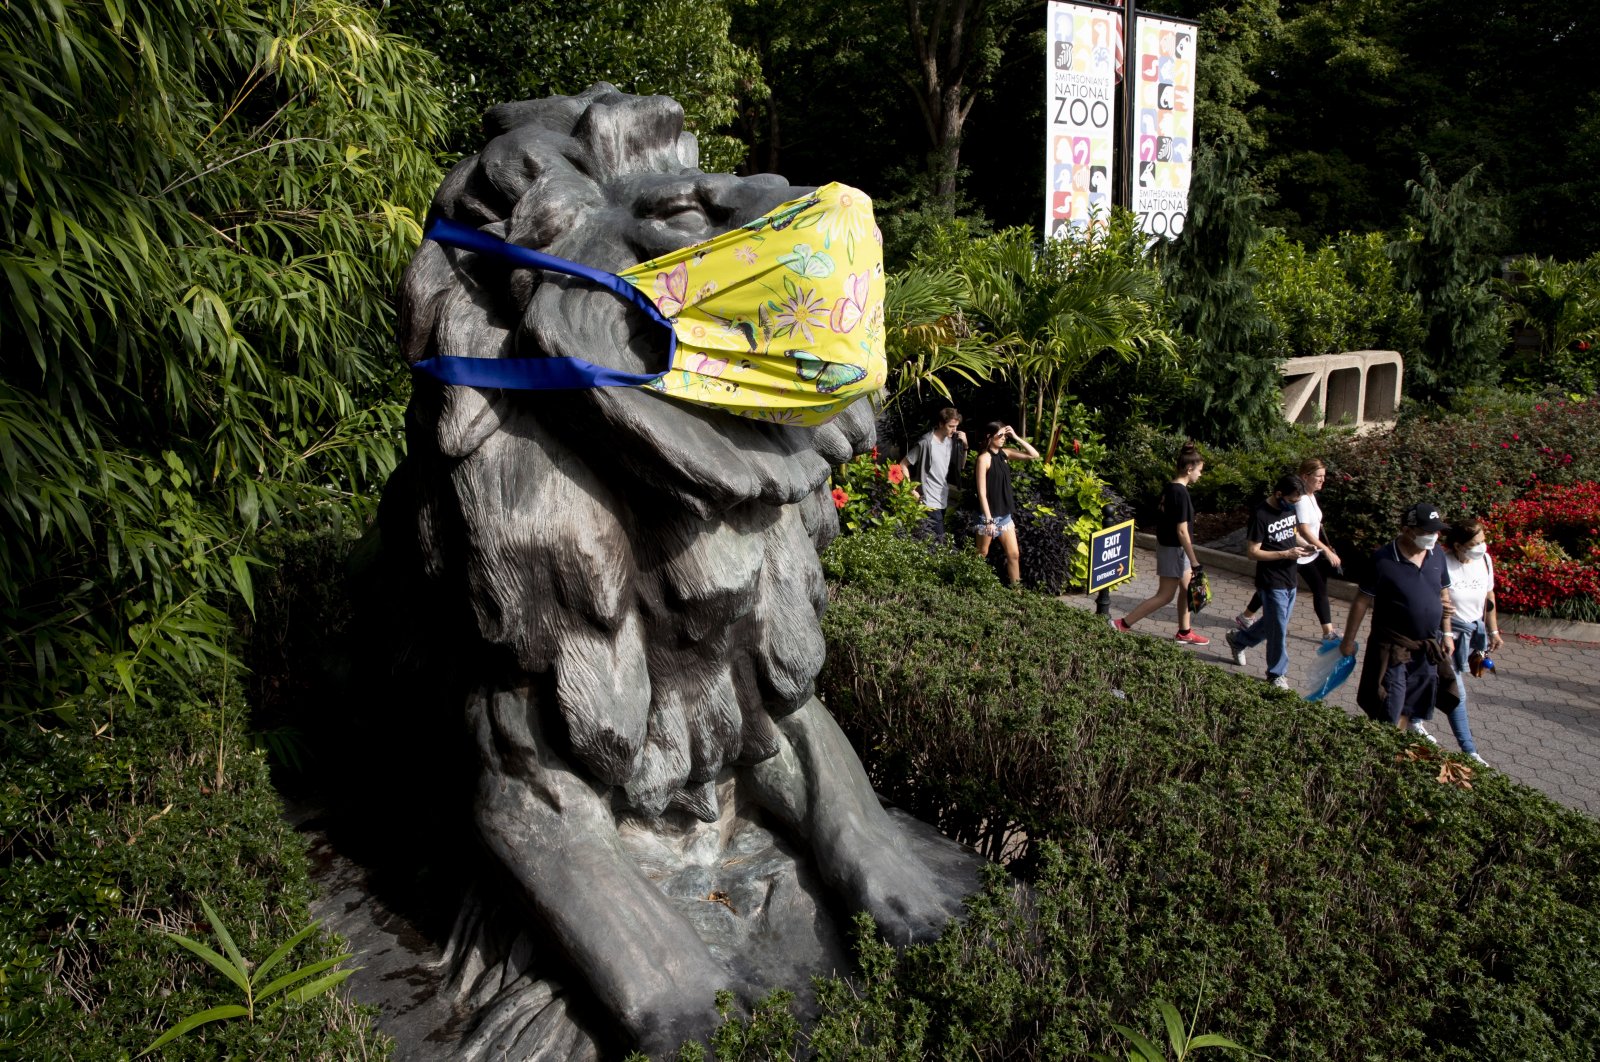 People exit the Smithsonian National Zoological Park beside a statue of a lion that is decorated with a face mask, Washington, D.C., U.S., Sept. 17, 2021. (EPA Photo)